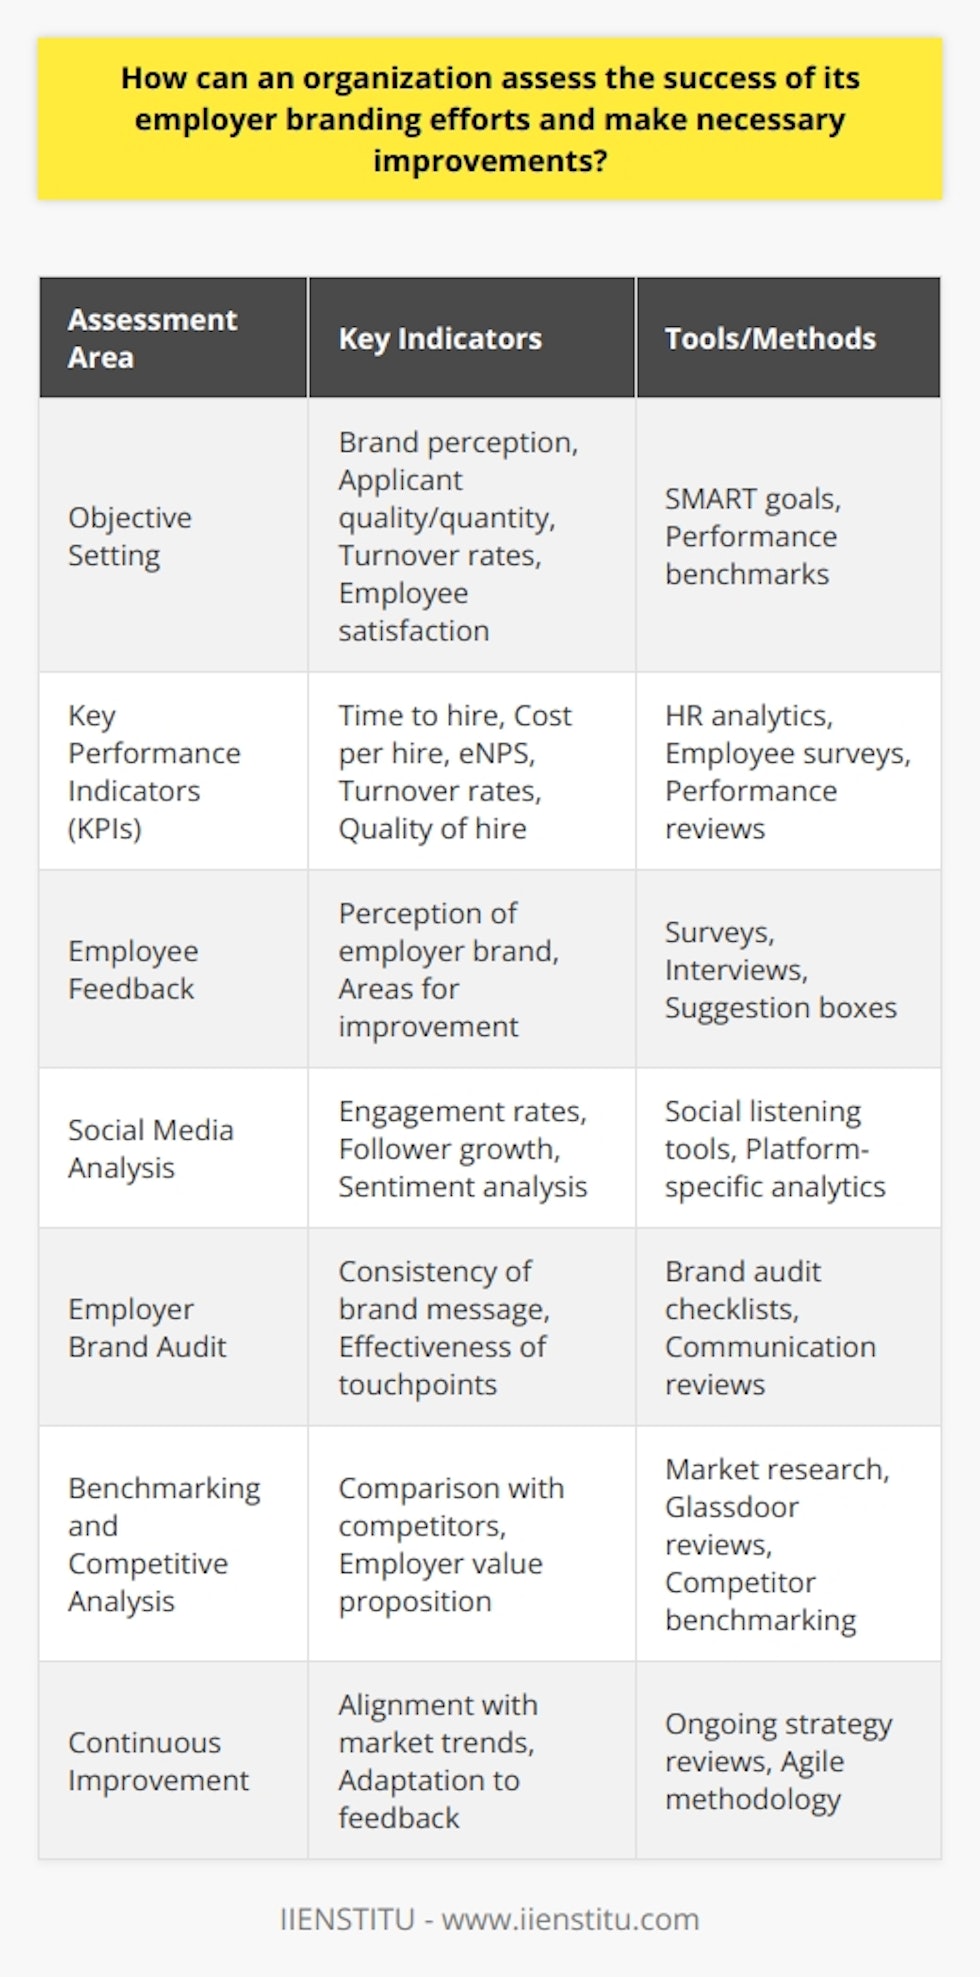 To evaluate the effectiveness of employer branding strategies, organizations can employ a comprehensive approach that includes both qualitative and quantitative measures. Rigorous assessment helps in making informed decisions for refinement and direction.Setting Clear Objectives for Employer BrandingThe first step in assessing employer branding success is to set clear, realistic, and measurable objectives against which performance can be measured. These goals might include improved brand perception in the market, increased quality or quantity of job applicants, lower turnover rates, or higher employee satisfaction scores. Having these objectives allows organizations to develop a targeted approach to measuring outcomes.Key Performance Indicators (KPIs)Success can be gauged by tracking key performance indicators (KPIs) that are aligned with the employer branding objectives. Some potential KPIs include:- Time to hire: A reduction indicates increased efficiency in attracting the right candidates.- Cost per hire: A decrease can imply the organization is attracting candidates more economically, potentially due to a strong employer brand.- Employee Net Promoter Score (eNPS): This measures employee willingness to recommend the organization as a place to work.- Employee turnover rates: Lower turnover might suggest greater job satisfaction due to a positive employer brand.- Quality of hire: Assessment of new employees' performance can help determine if the employer brand is attracting the best talent.Gathering Employee FeedbackInternal feedback is crucial for evaluating the internal perception of an employer brand. This involves collecting insights from employees through surveys, interviews, and suggestion boxes. Identifying patterns in feedback can provide a clear perspective on the internal health of the employer brand and areas where it could be improved.Social Media AnalysisThe organization's presence on social media platforms can reveal much about its employer brand success. Metrics such as engagement rates, follower growth, and the sentiment of comments and discussions relating to the company can inform how the brand is perceived externally. This analysis can also uncover the need to adjust messaging or address any misperceptions.Employer Brand AuditsAn employer brand audit involves a comprehensive review of all touchpoints and communications that impact perceptions of the company. This may include career pages, job descriptions, and recruitment materials. The audit provides a holistic view of the brand's market presence and can uncover inconsistencies or areas for enhancement.Benchmarking and Competitive AnalysisComparing an employer brand to those of industry peers can provide valuable context. This includes analyzing competitors' employer value propositions, recruitment campaigns, and employee reviews on platforms such as Glassdoor. Understanding competitors' positioning can help an organization differentiate itself and identify areas for improvement.Continuous ImprovementEmployer branding is not a set-and-forget initiative. It must evolve continuously based on the feedback, measurements, and market trends. This ongoing process of evaluation and refinement ensures that strategies remain effective in attracting and retaining talent.In conclusion, a successful assessment of employer branding involves a blend of introspective employee feedback, external brand perception analysis, and objective KPI tracking. Organizations committed to continuous improvement can adapt and refine their strategies, thereby enhancing their position as an employer of choice in a competitive talent market.